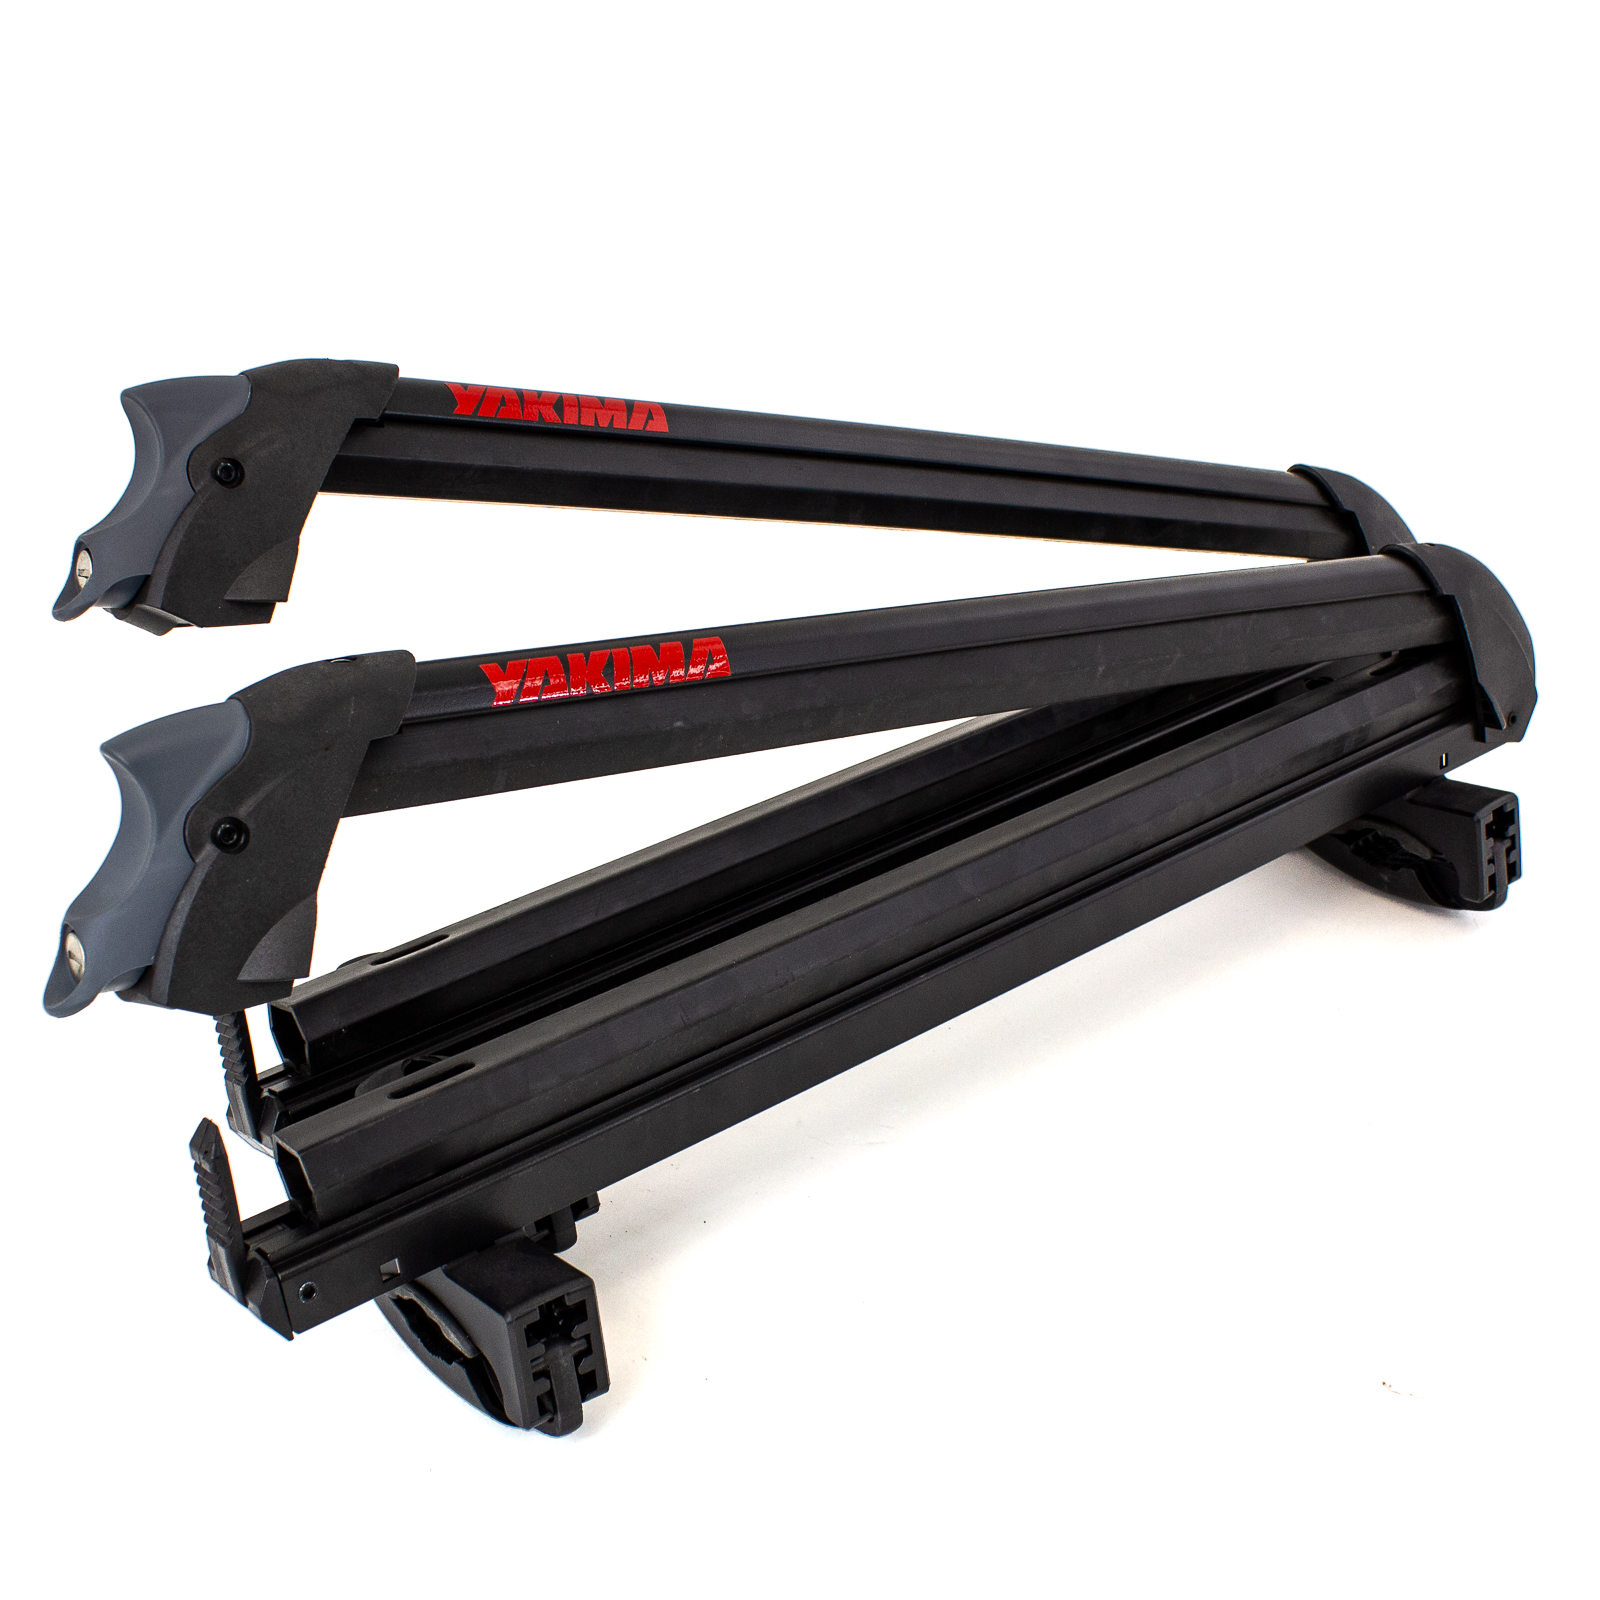 Would this attach to 43.3 Car Top Roof Rack Cross Bar Luggage Carrier for Honda Civic  2006-21?